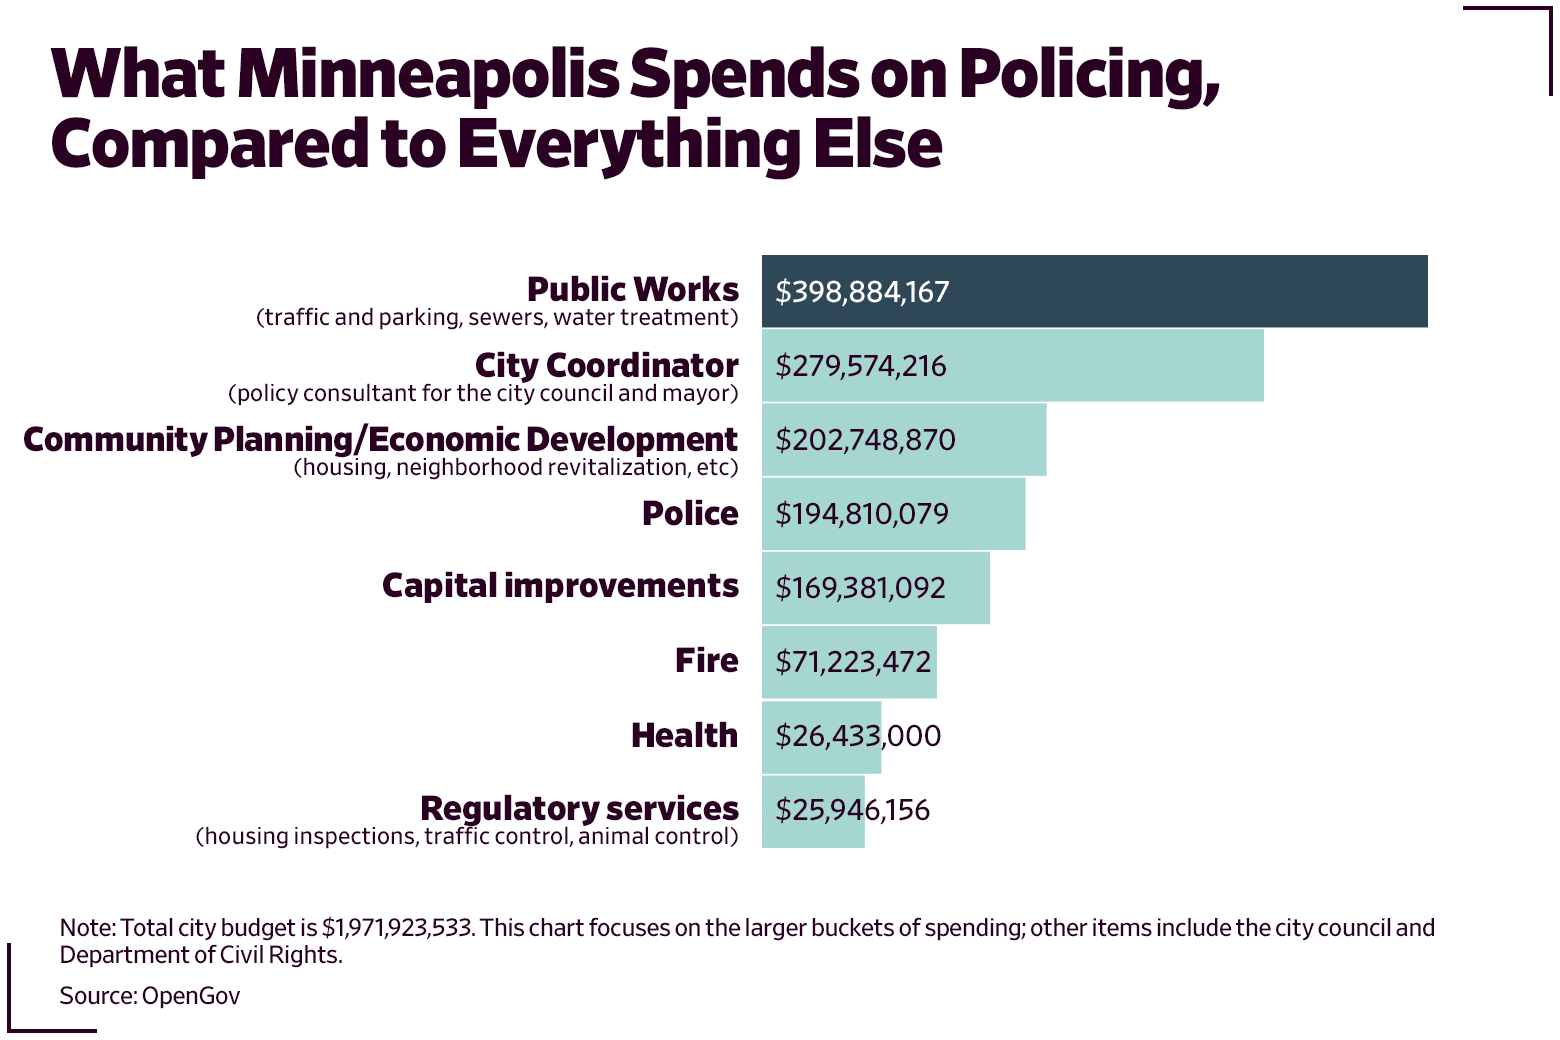 Bar graph showing what Minneapolis spends on policing compared with everything else. 